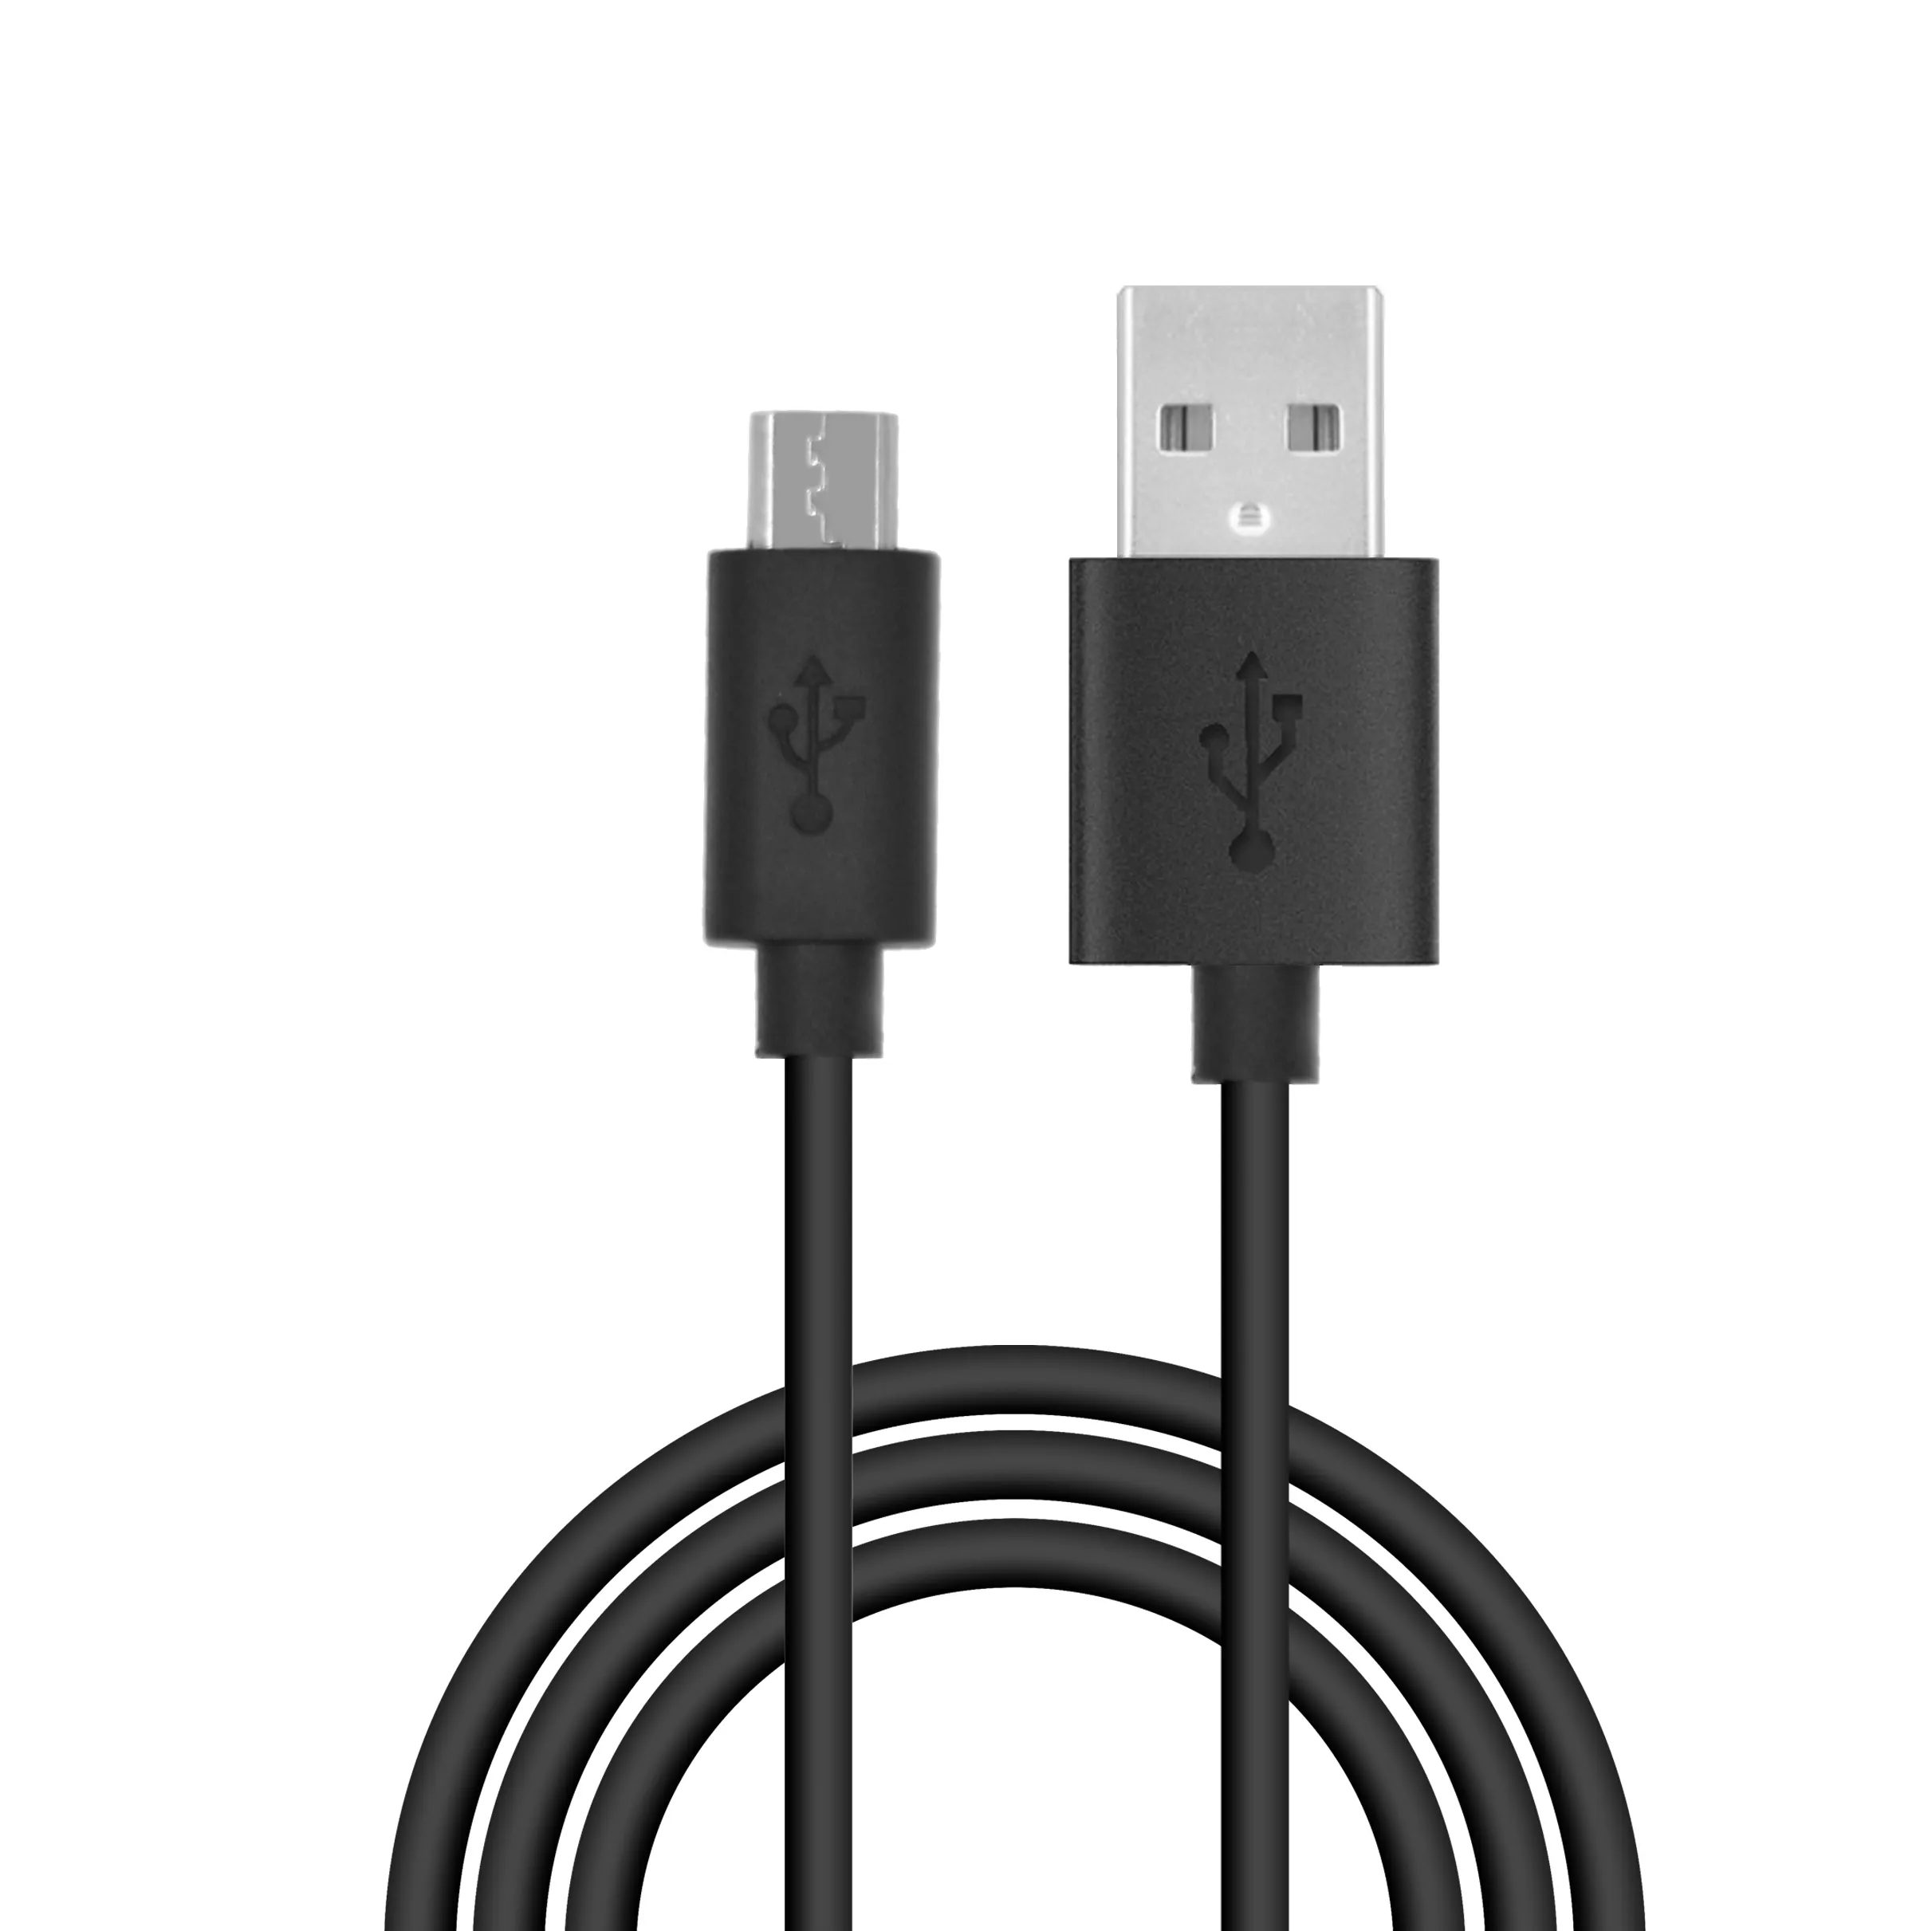 PVC material black customize 3ft 6ft 10ft 2A v8 micro usb fast data charging cable for Motorola Android mobile phone cheap price